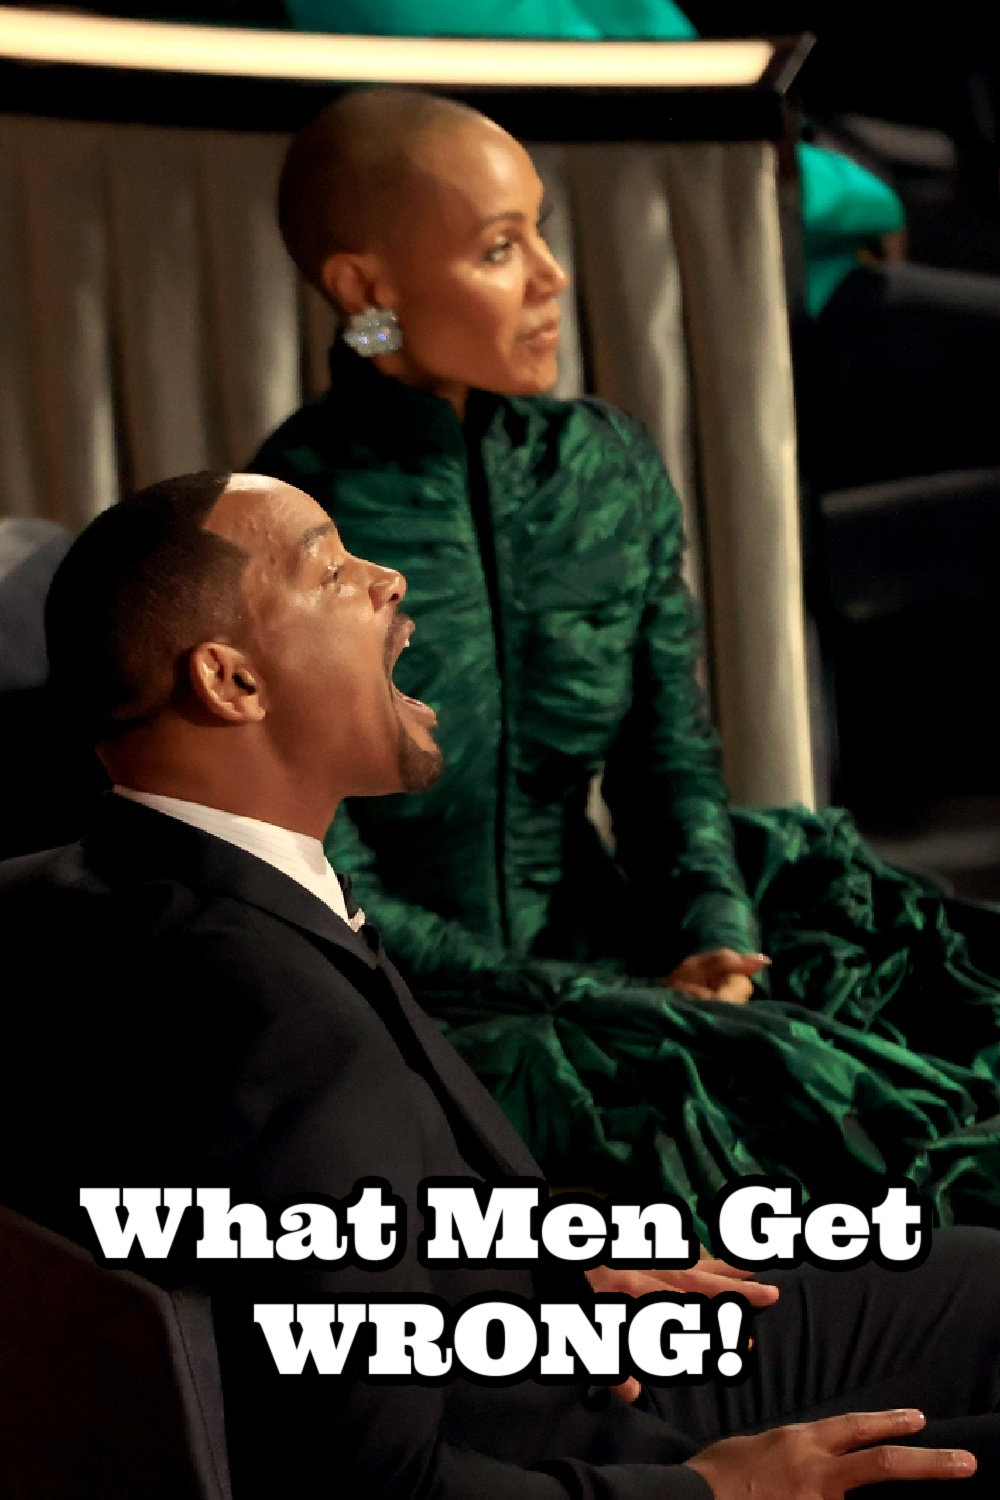 how to deal with a masculine woman, how to defend your partner, what most men get wrong, why she tries to control me, woman in masculine energy, why women try to control men, controlling women, masculine energy in a woman, relationship advice for men, will smith chris rock, will smith chris rock jada pinkett smith relationship, will smith jada pinkett smith relationship, will smith slaps chris rock, will smith smacks chris rock, understanding masculine and feminine energy, understanding masculine and feminine energy beginners guide, feminine and masculine energy in relationships, difference between feminine and masculine energy, feminine and masculine energy traits, Everyday Starlet, Sarah Blodgett